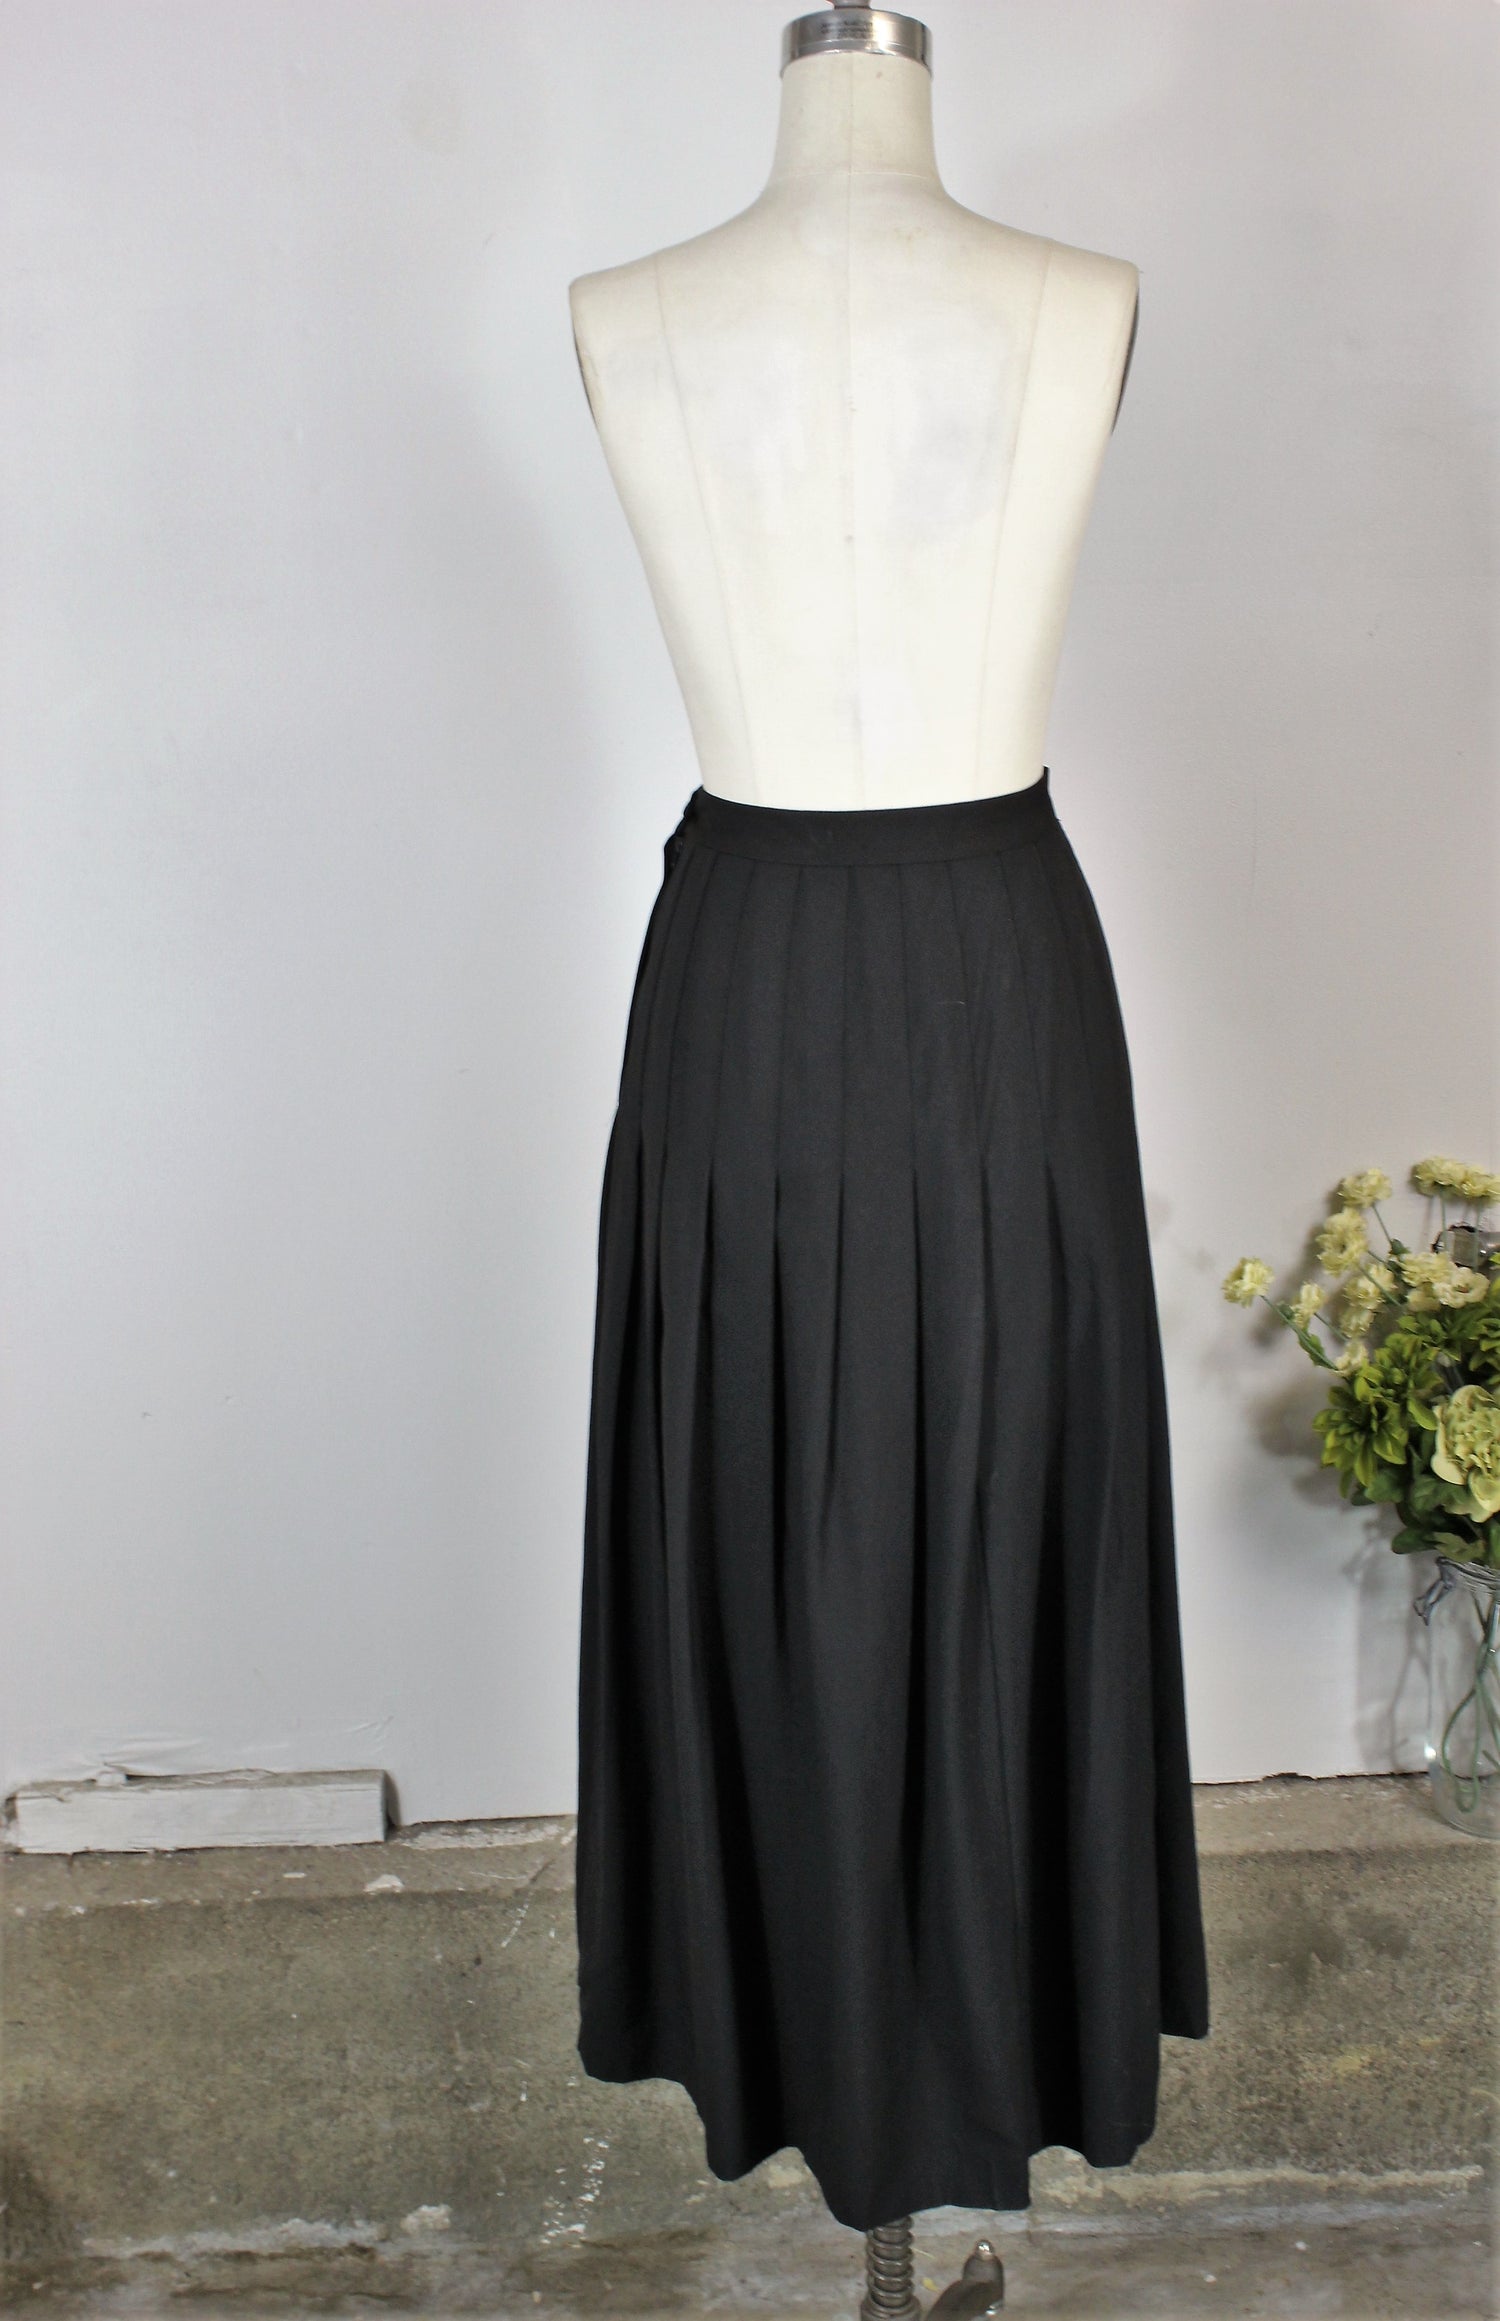 Vintage 1990s Black Pleated Maxi Skirt by Enrico Fratelli